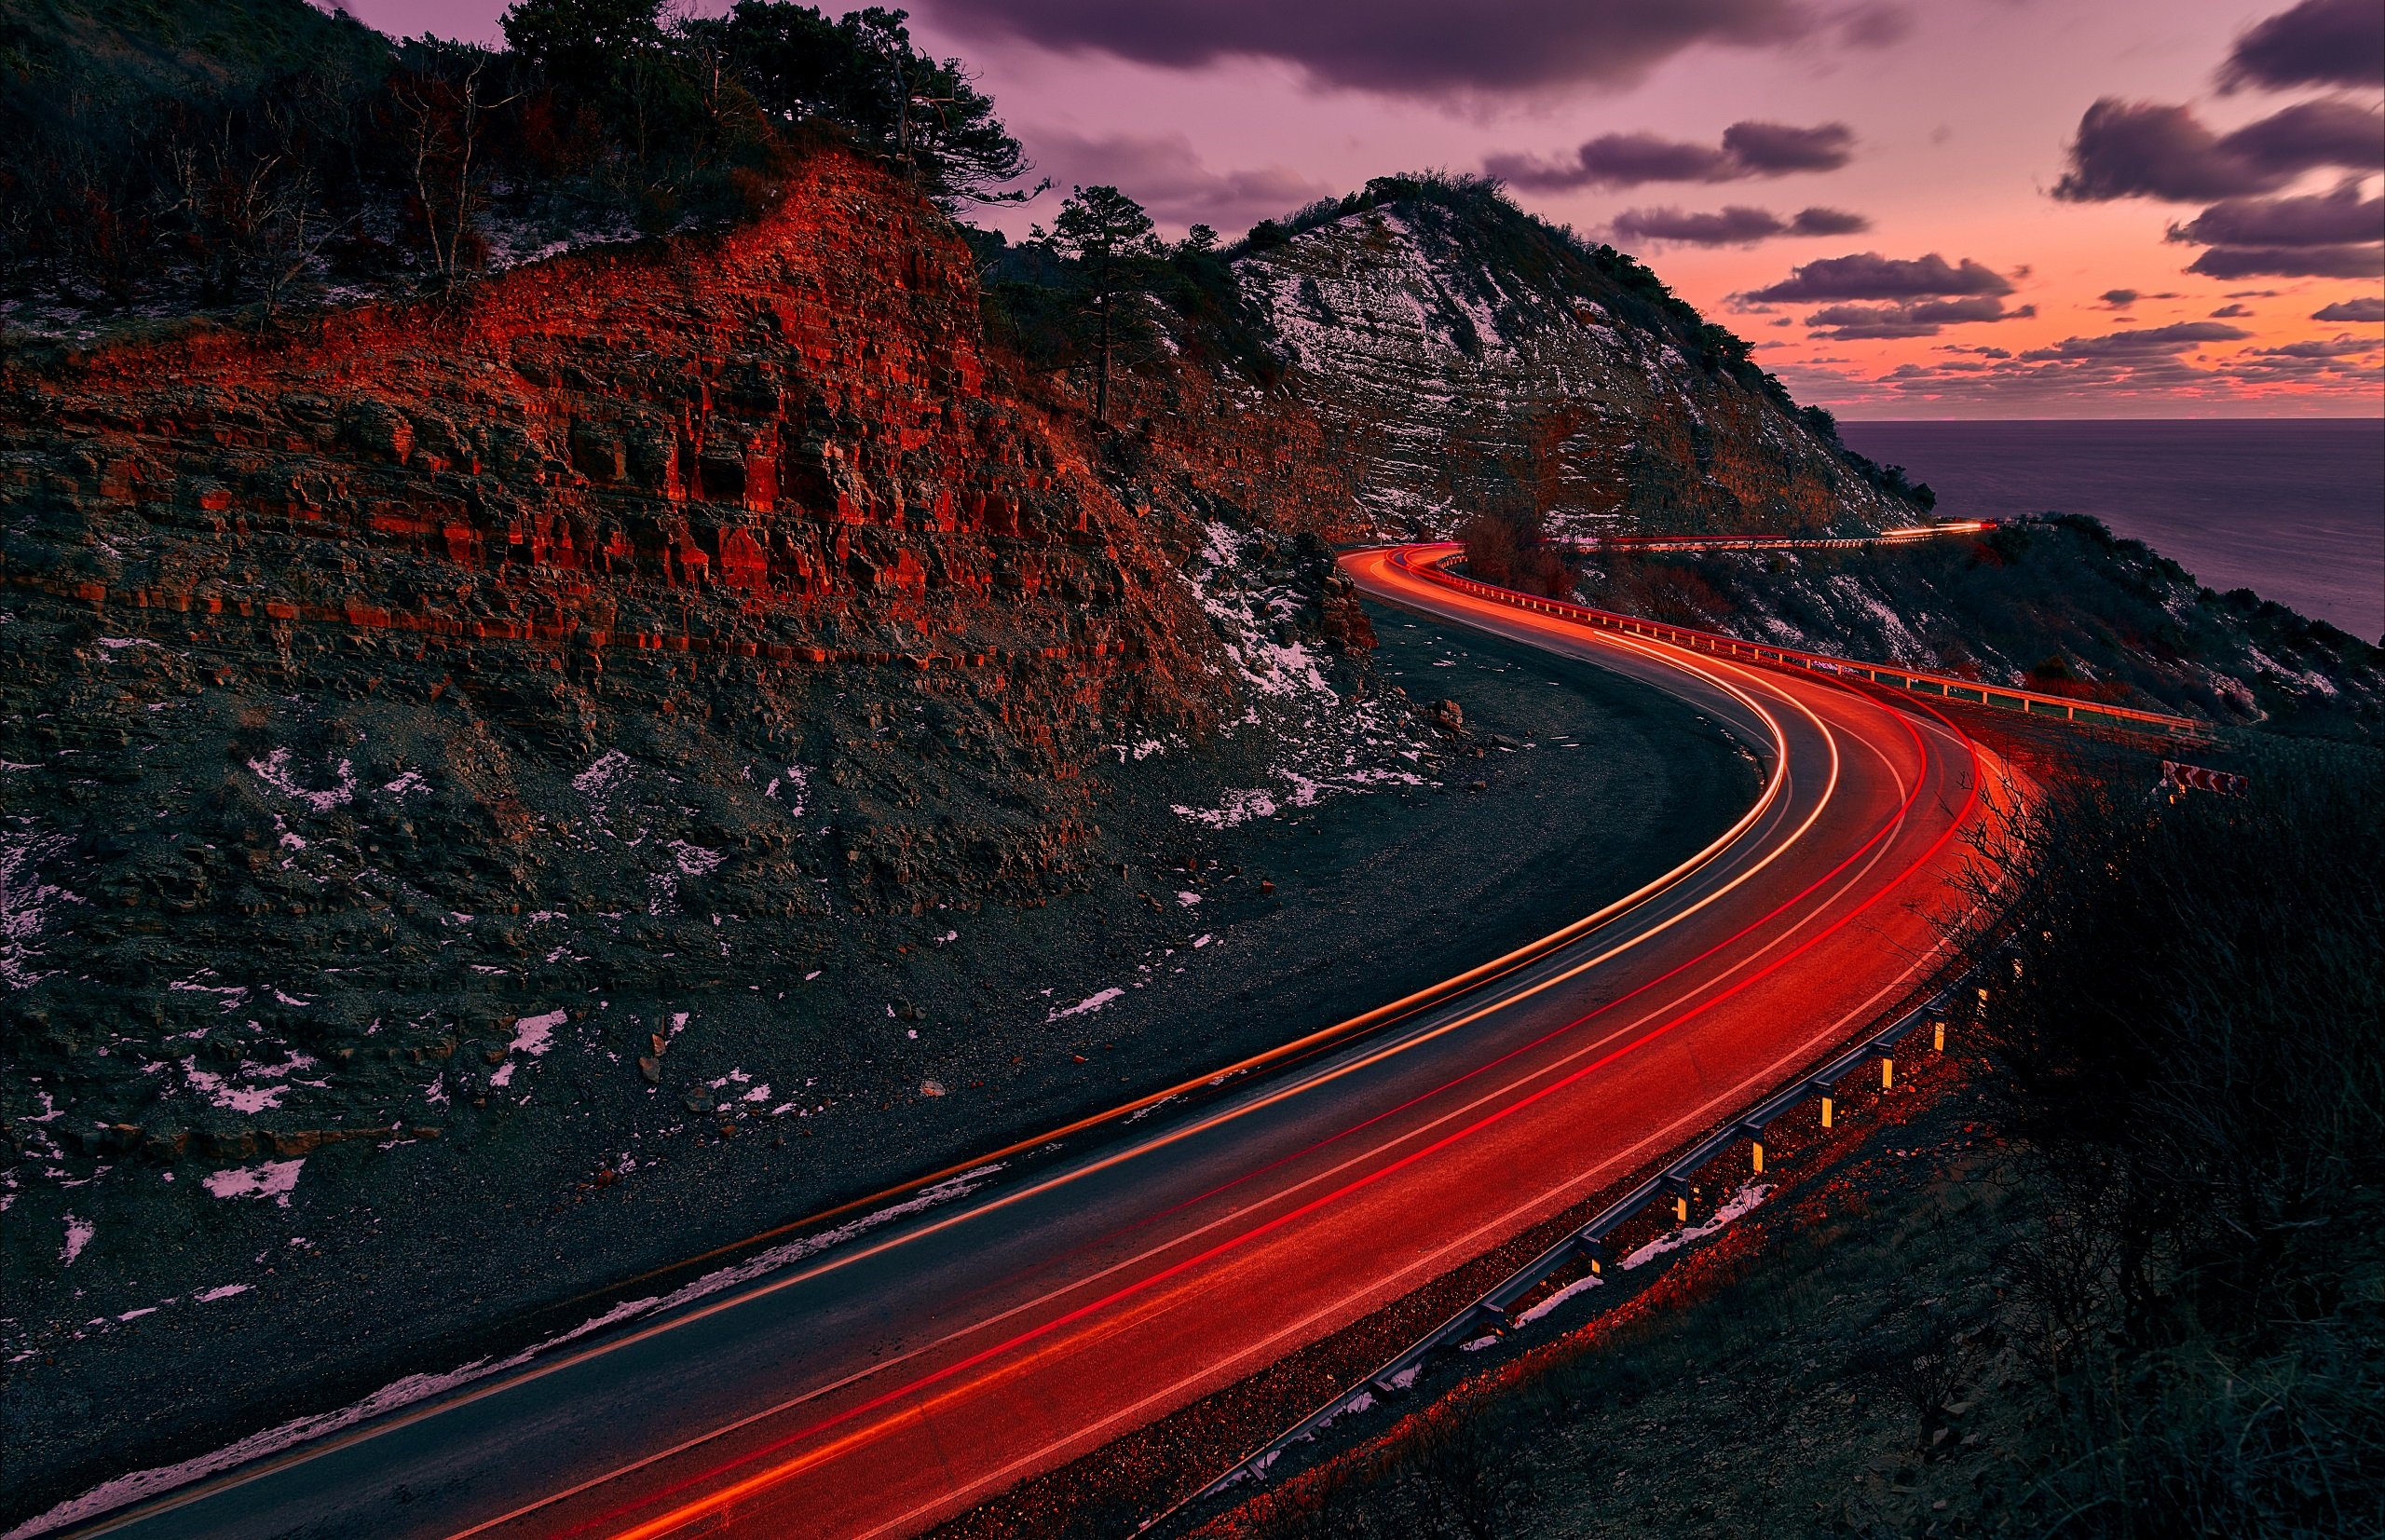 A winding road with red lights driving toward the future